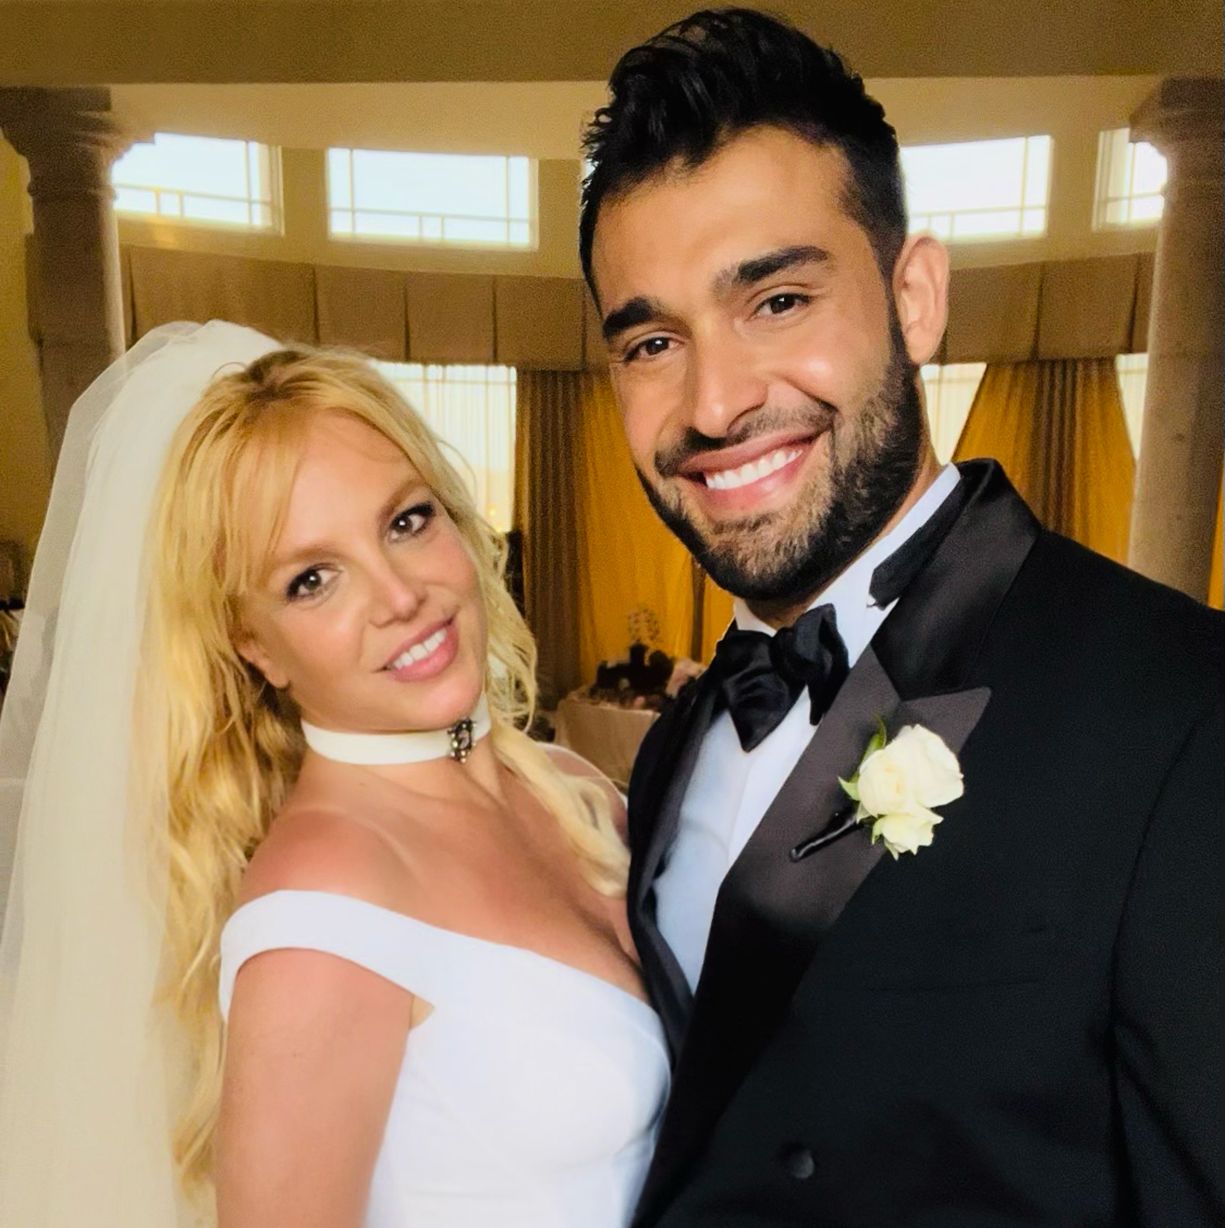 Here's Our First Look at Britney Spears and Sam Asghari's Fairytale Wedding